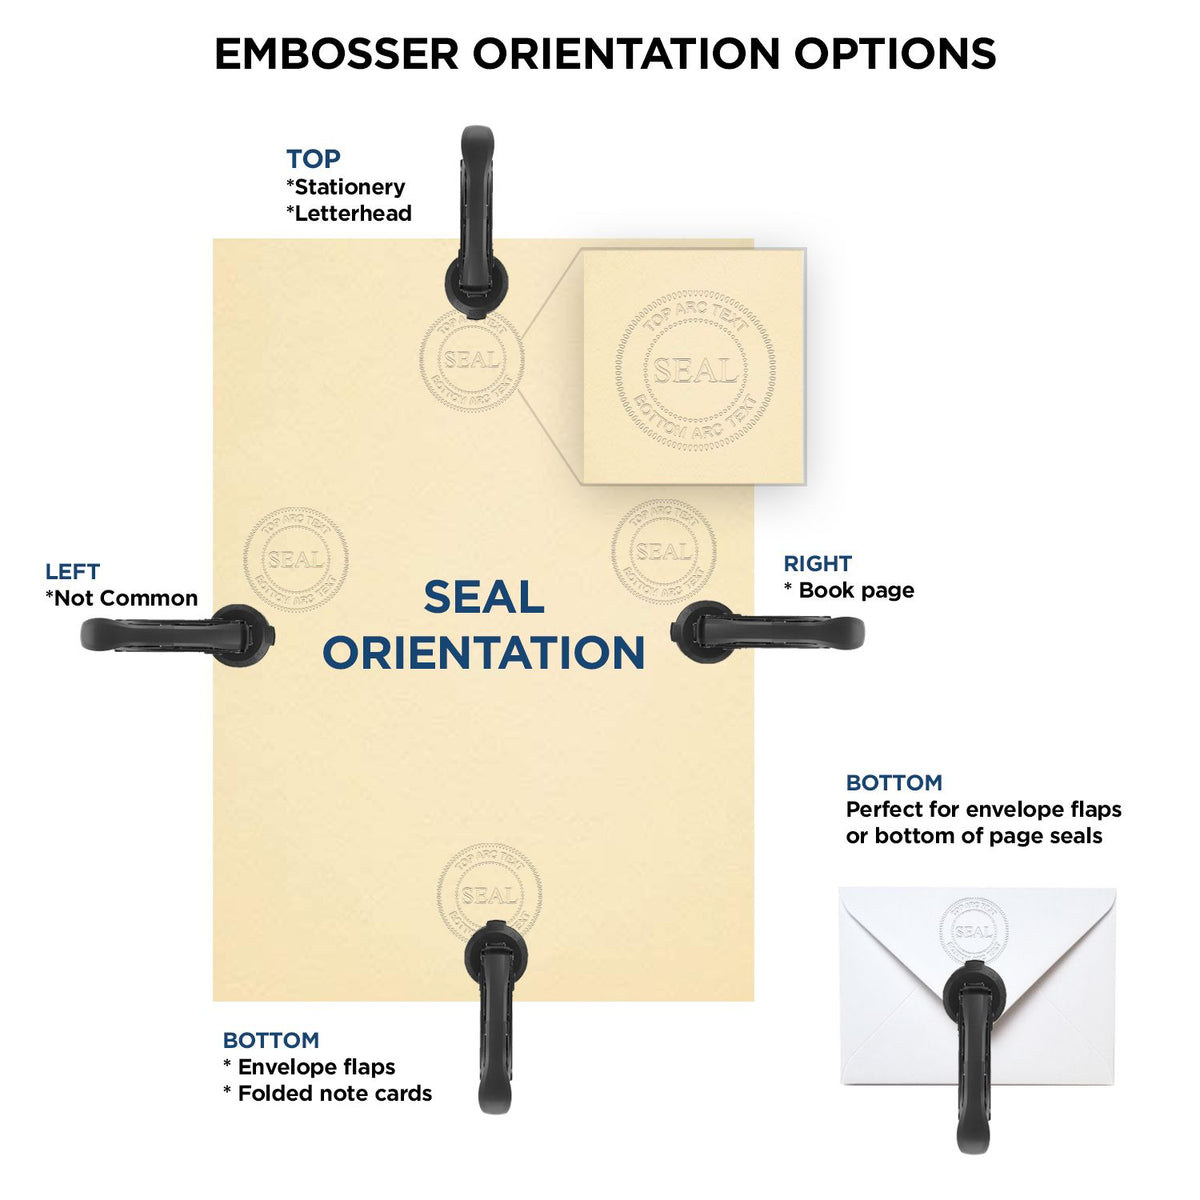 An infographic for the Long Reach Georgia Land Surveyor Seal showing embosser orientation, this is showing examples of a top, bottom, right and left insert.